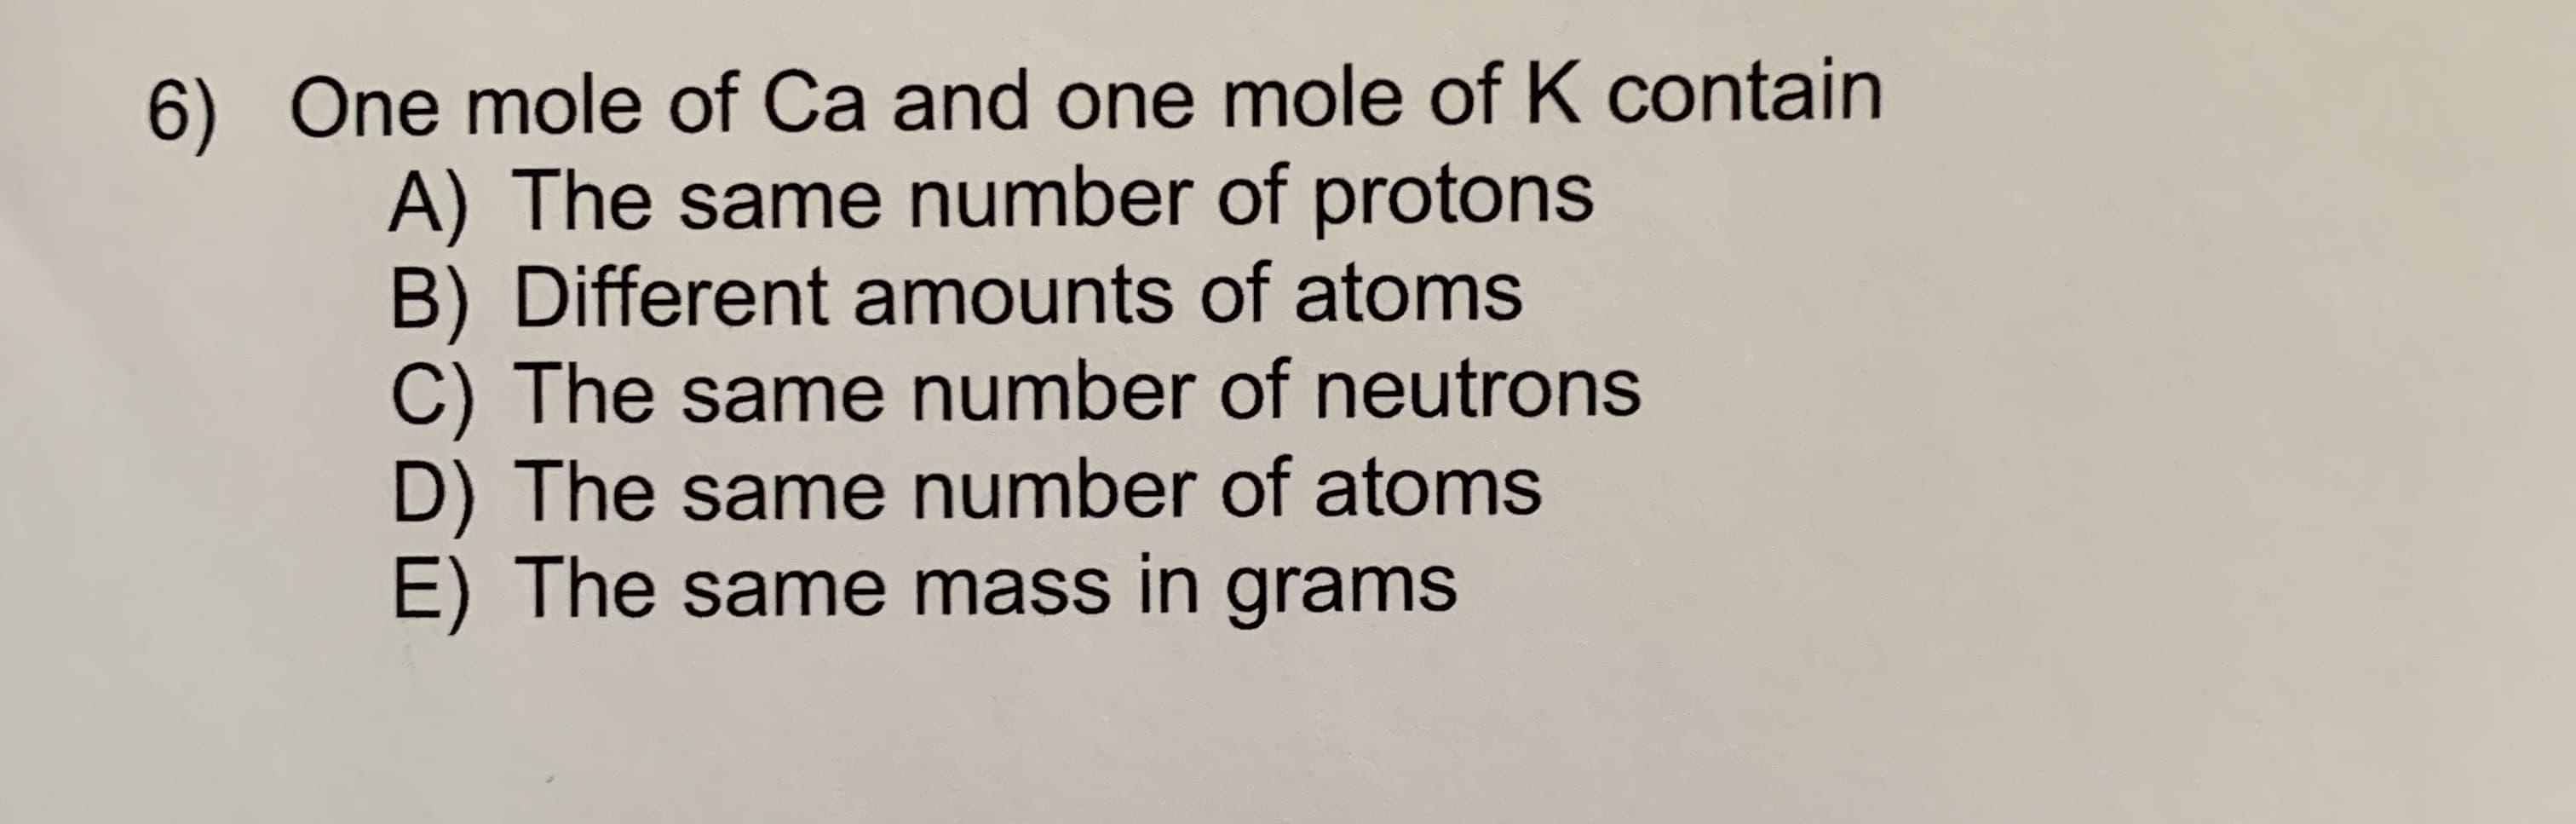 6) One mole of Ca and one mole of K contain
A) The same number of protons
B) Different amounts of atoms
C) The same number of neutrons
D) The same number of atoms
E) The same mass in grams
